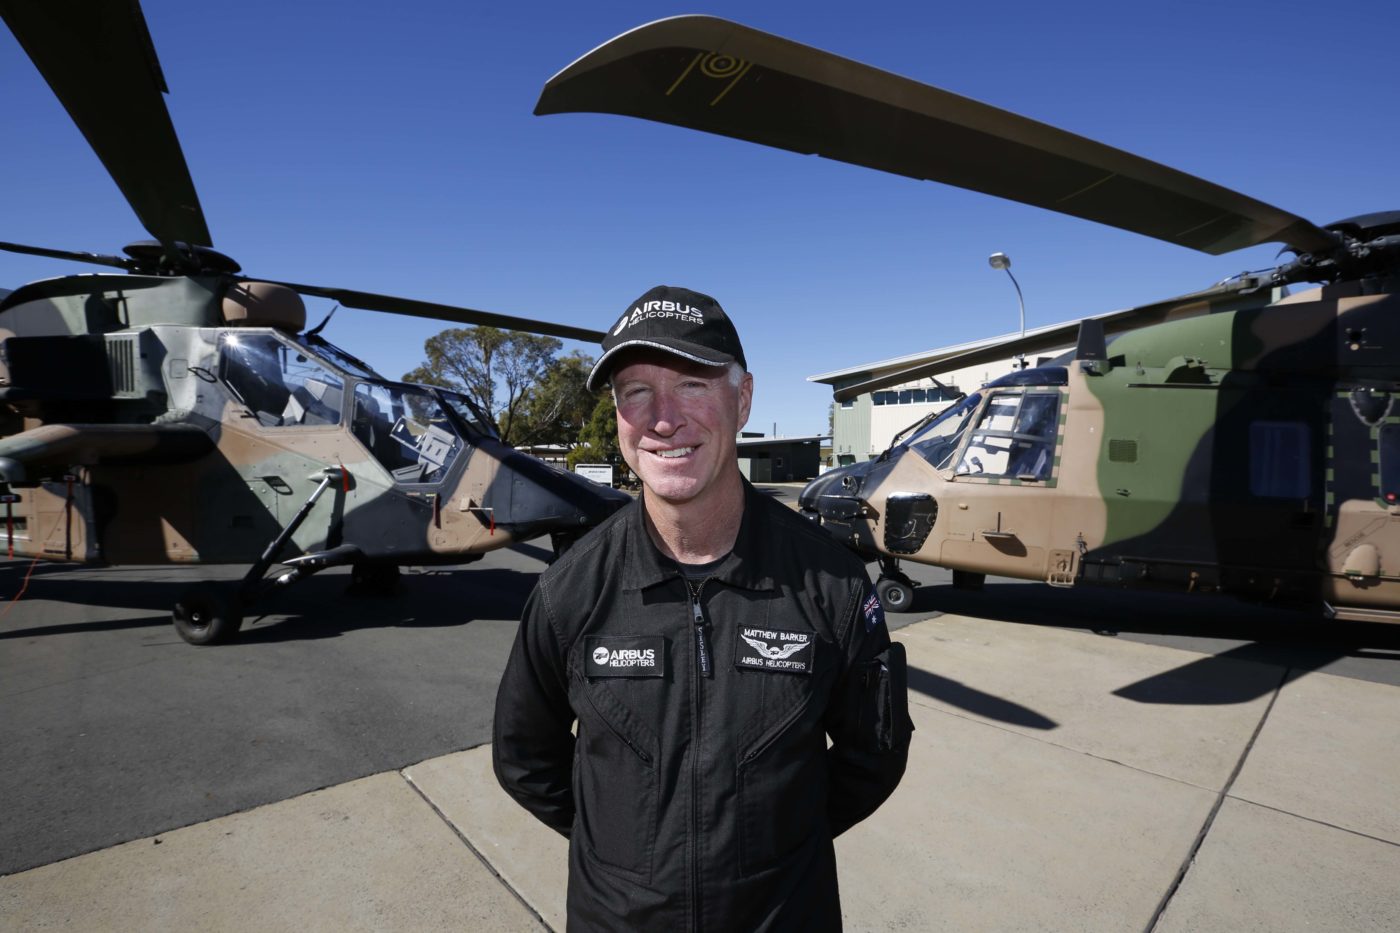 Barker started his flying career when he enlisted in the Australian Army as a specialist service officer pilot in October 1987. He now has a total of 8,150 hours of flying experience. Airbus Photo